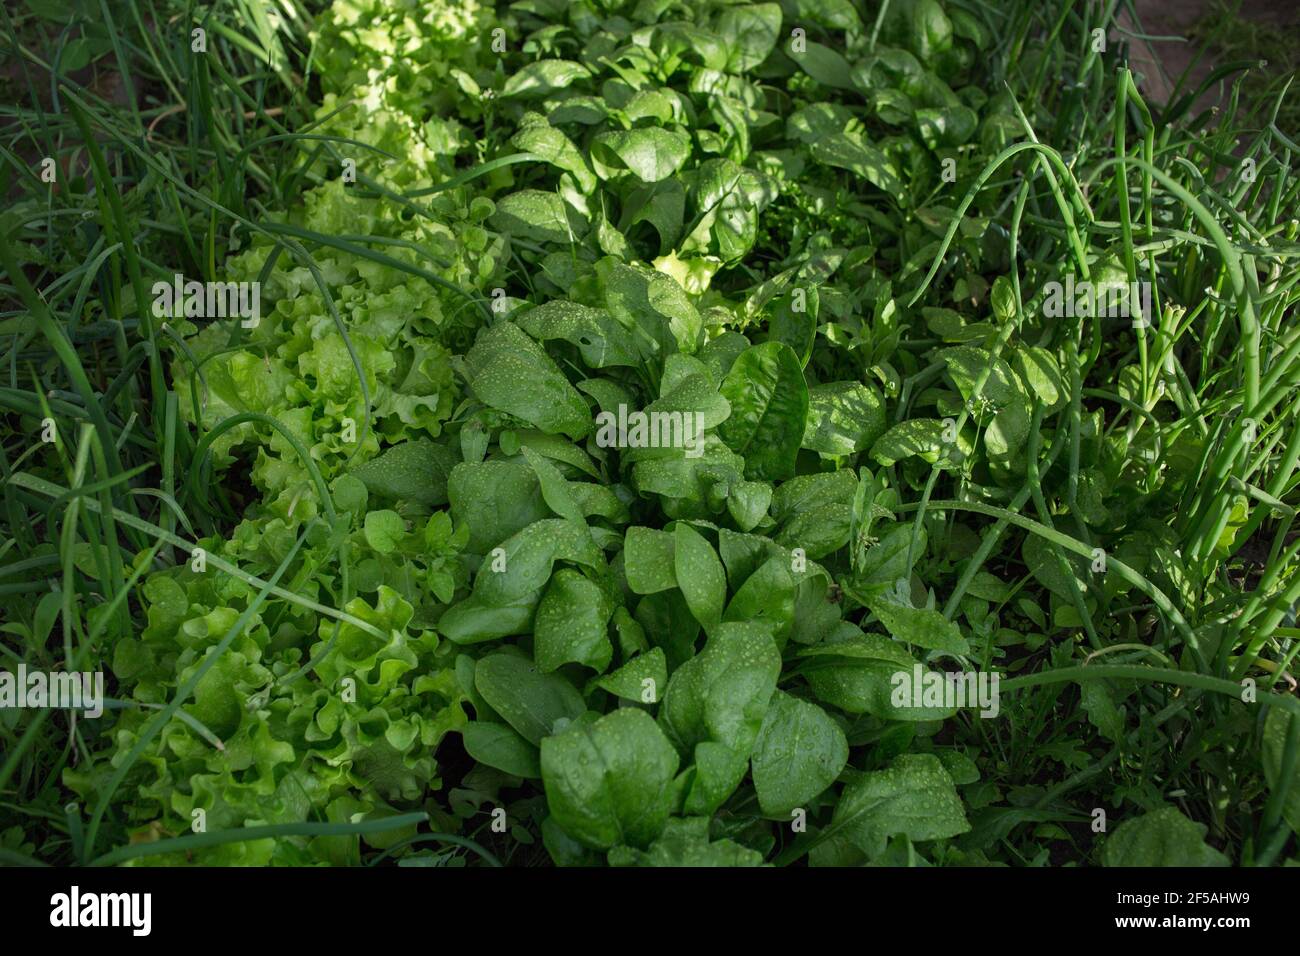 Lush harvest of spinach, lettuce and young green onions in the garden beds. Organic farming. Salad ingredients. After the rain. Selective focus Stock Photo